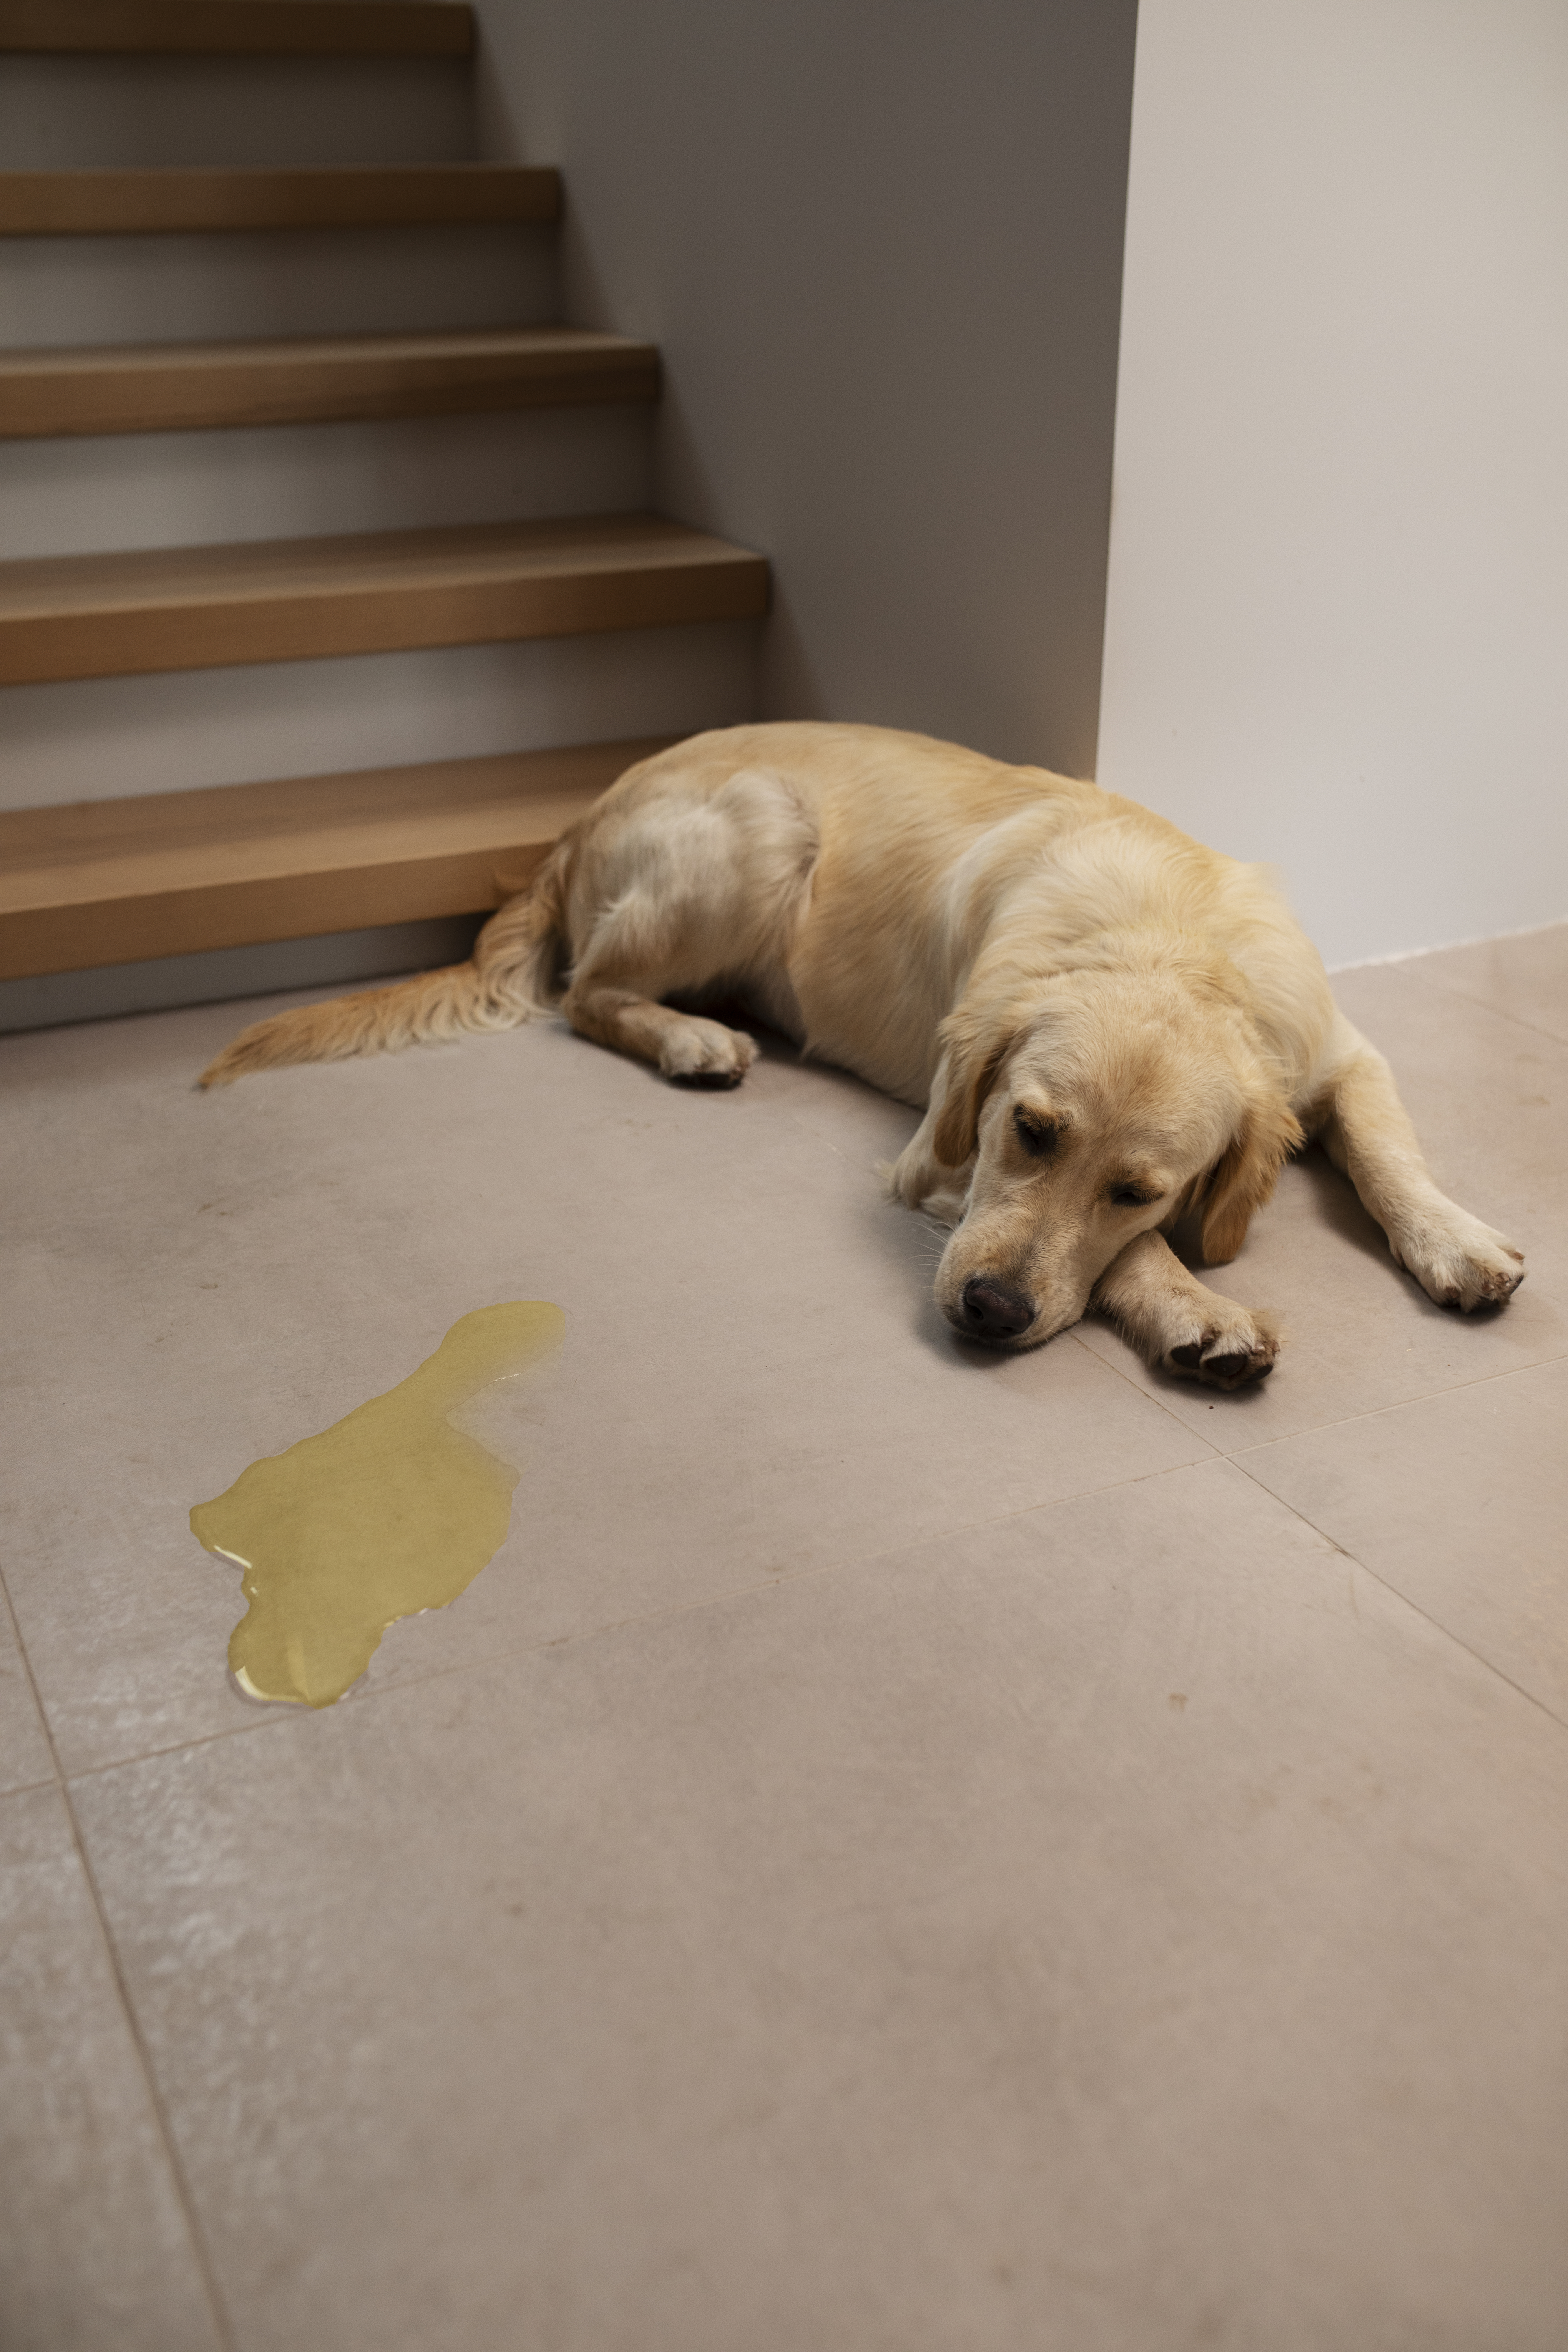 Pets urinating in the home - labrador